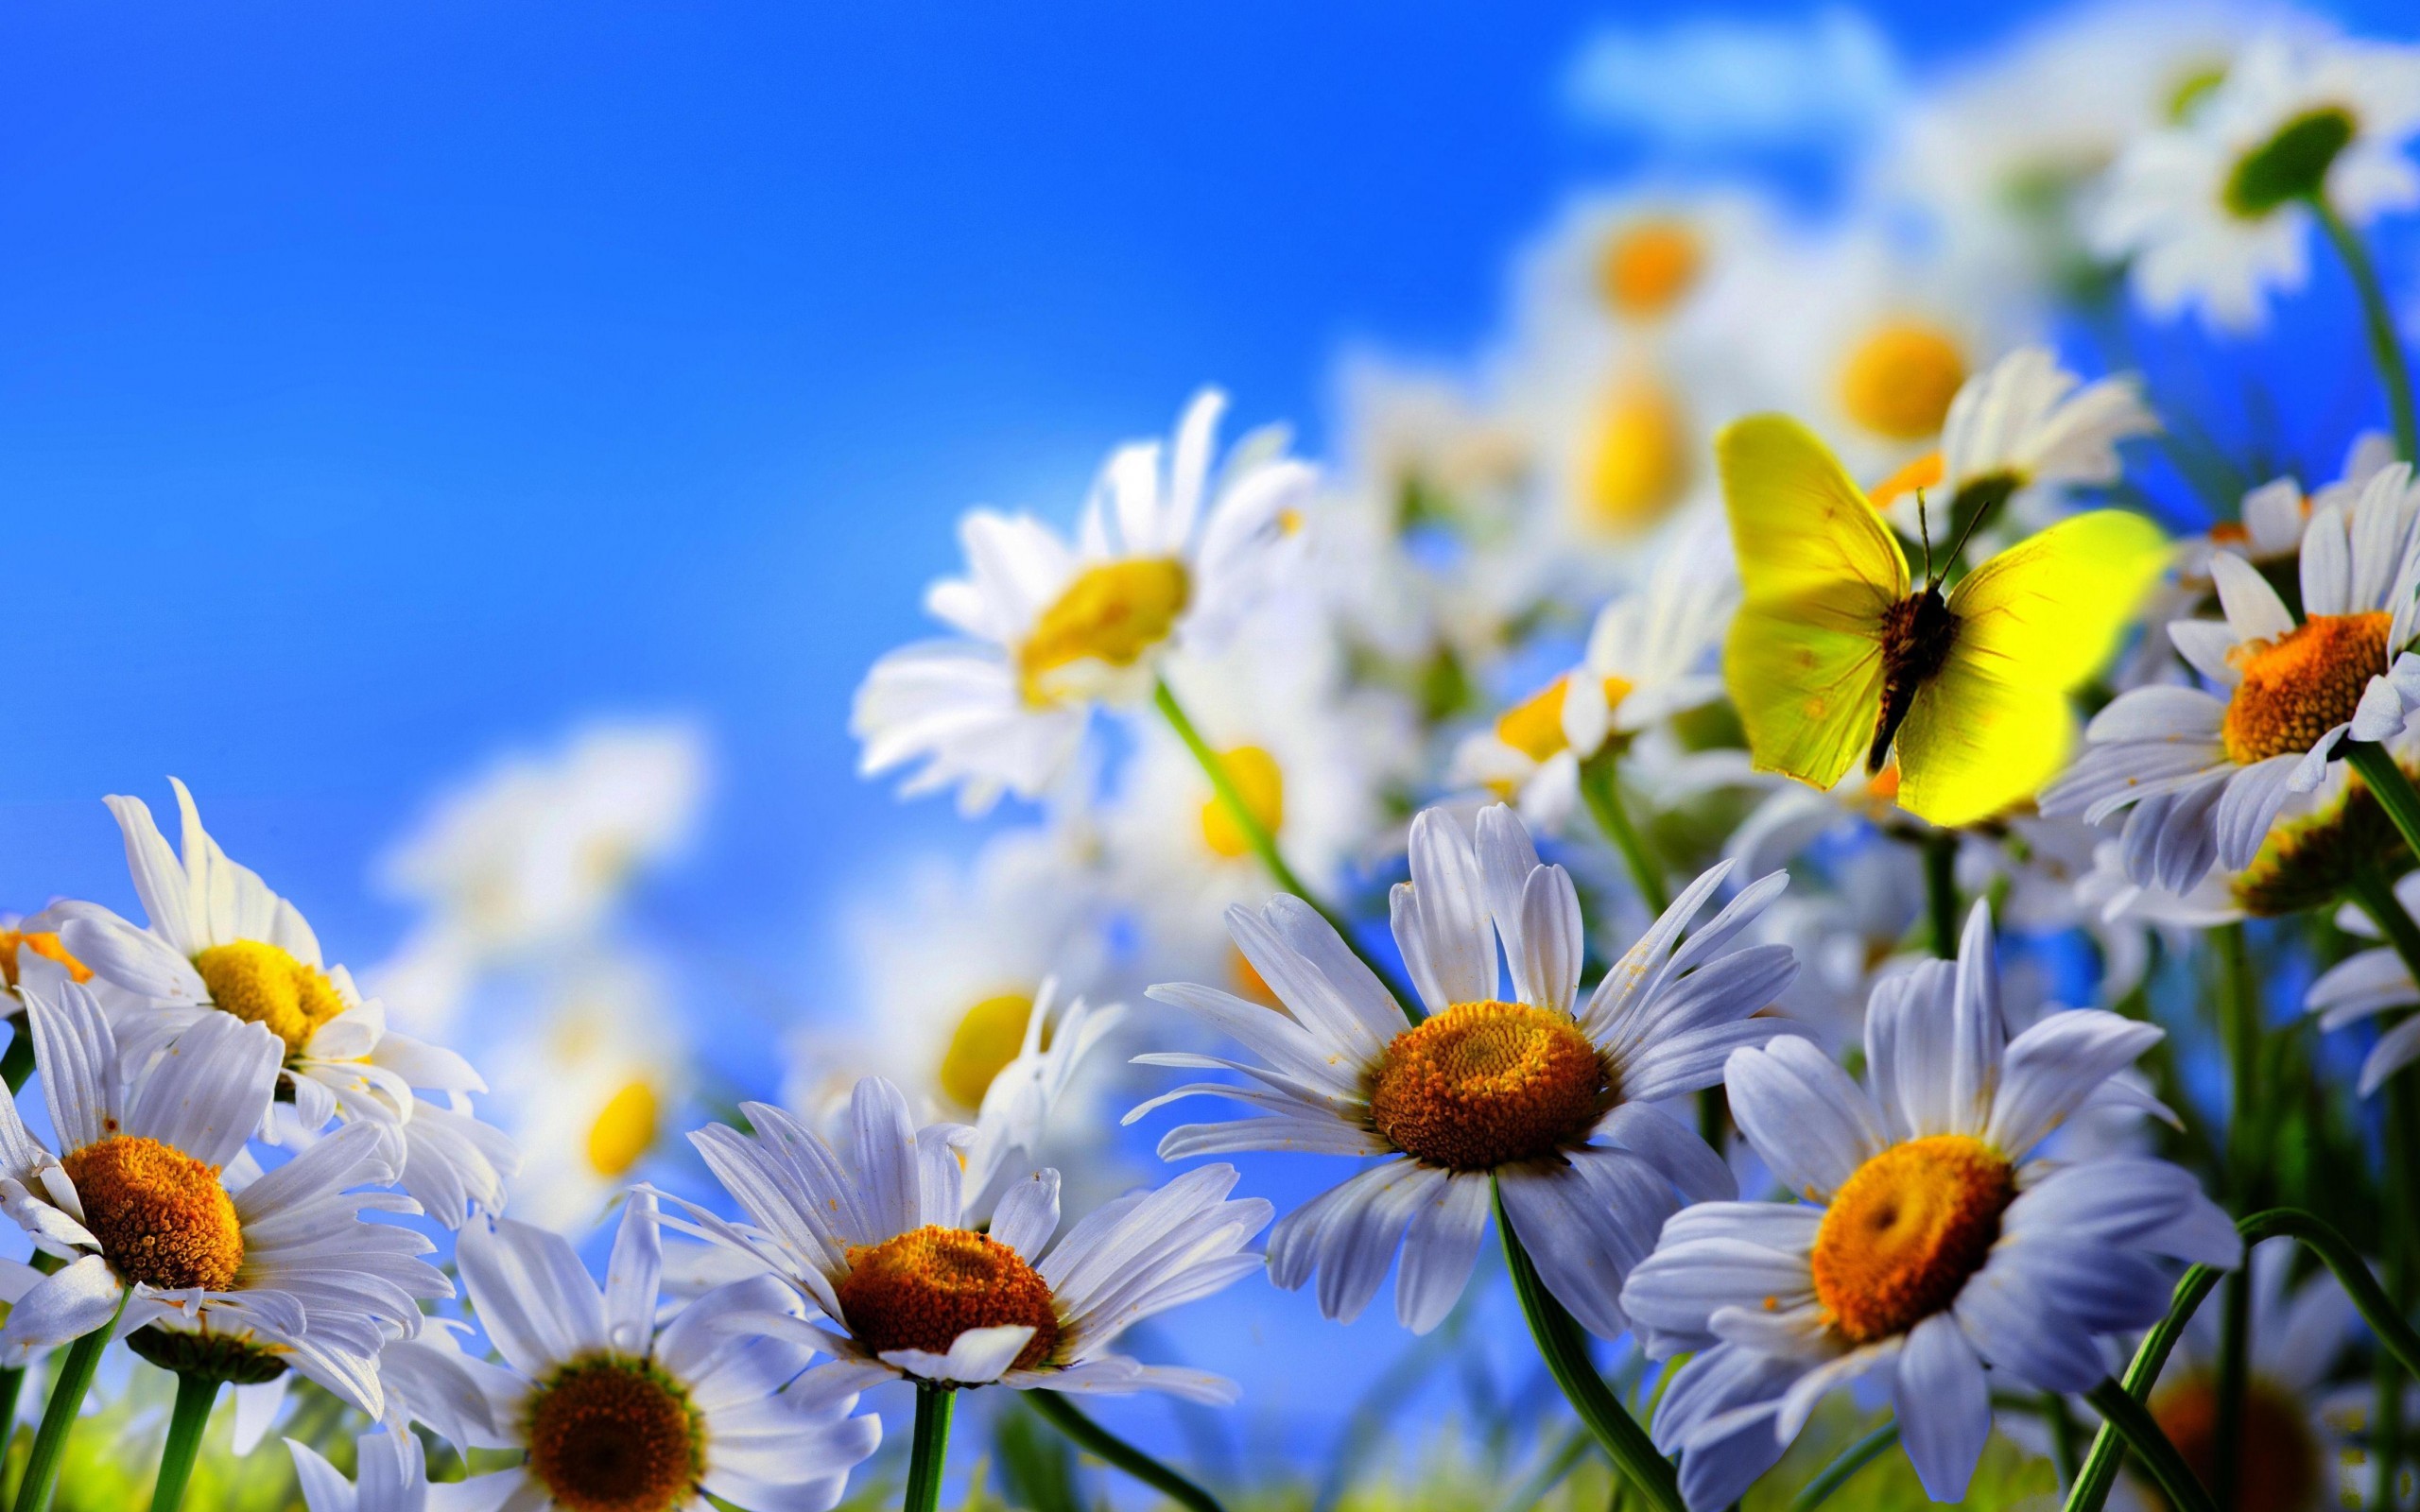 butterflies, blue, insects, flowers, plants, camomile wallpaper for mobile